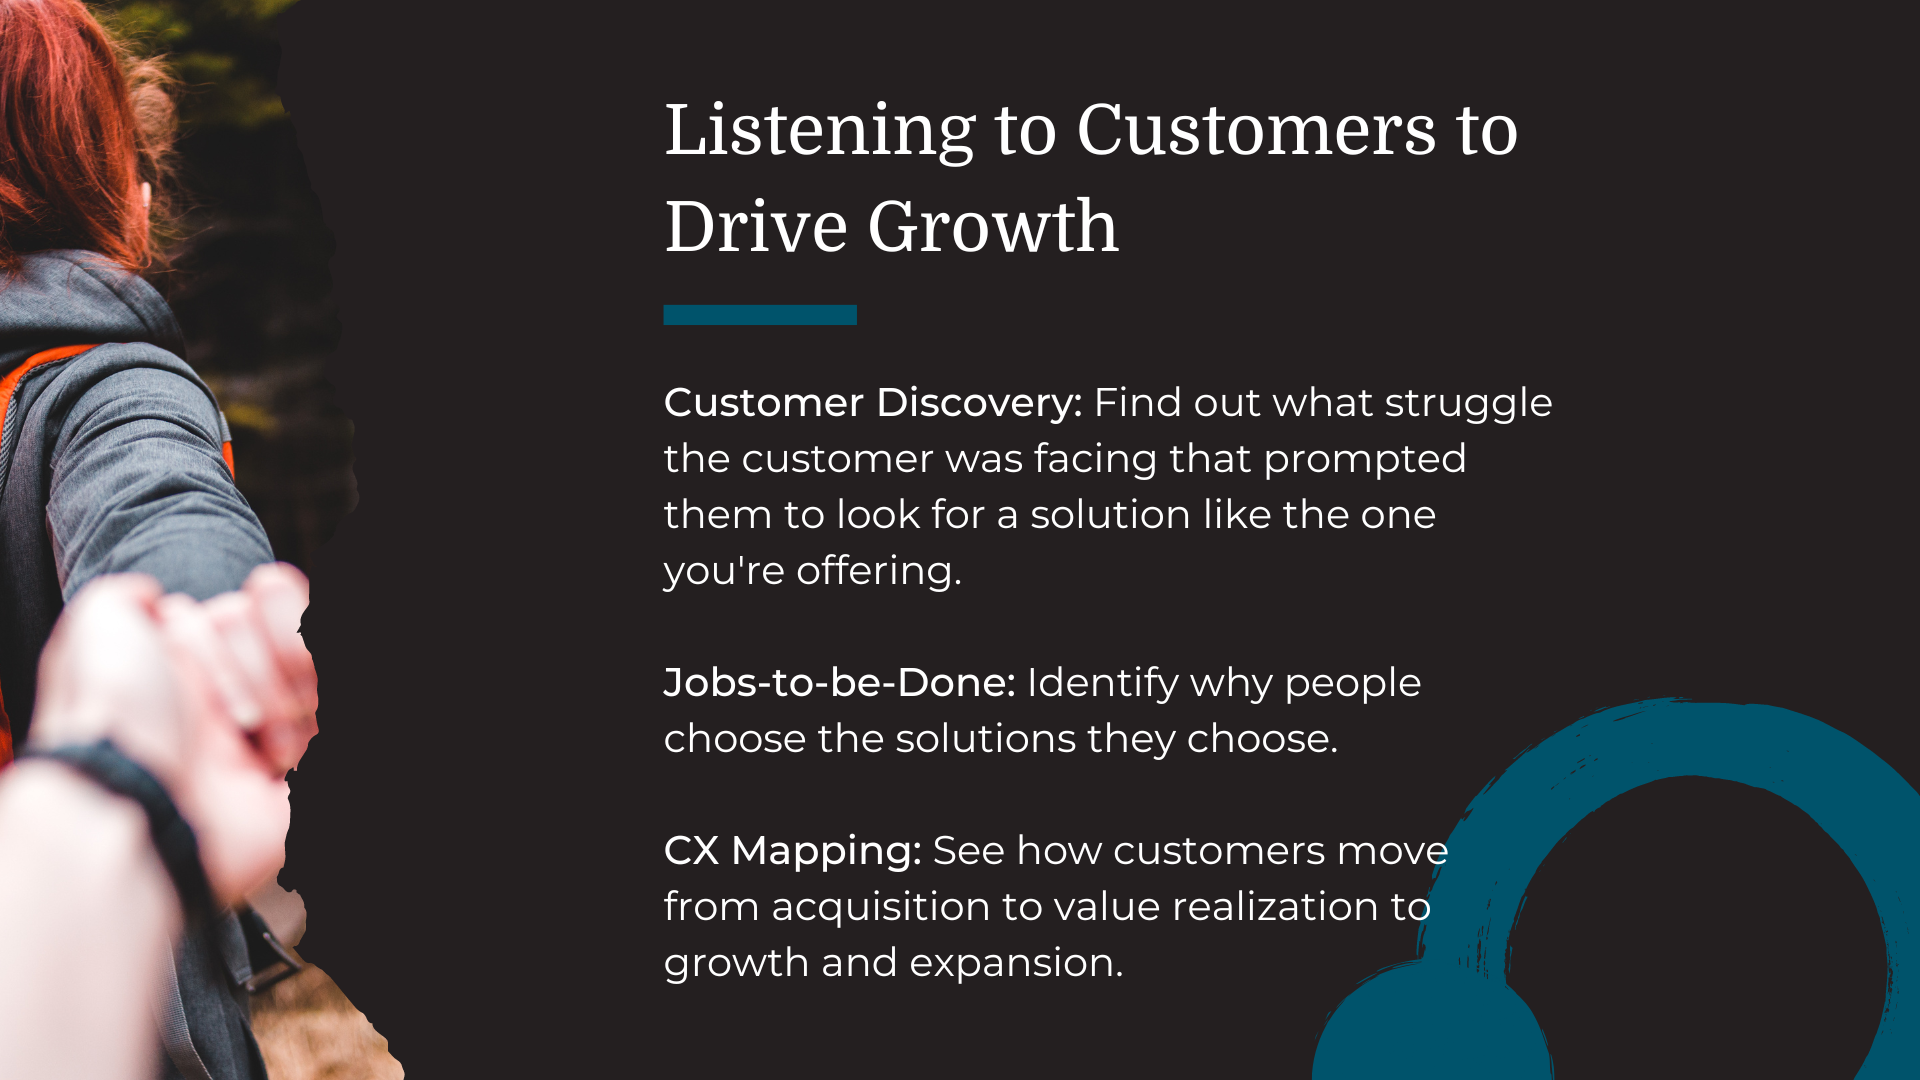 reasons to use customer discovery, jobs-to-be-done, and cx mapping